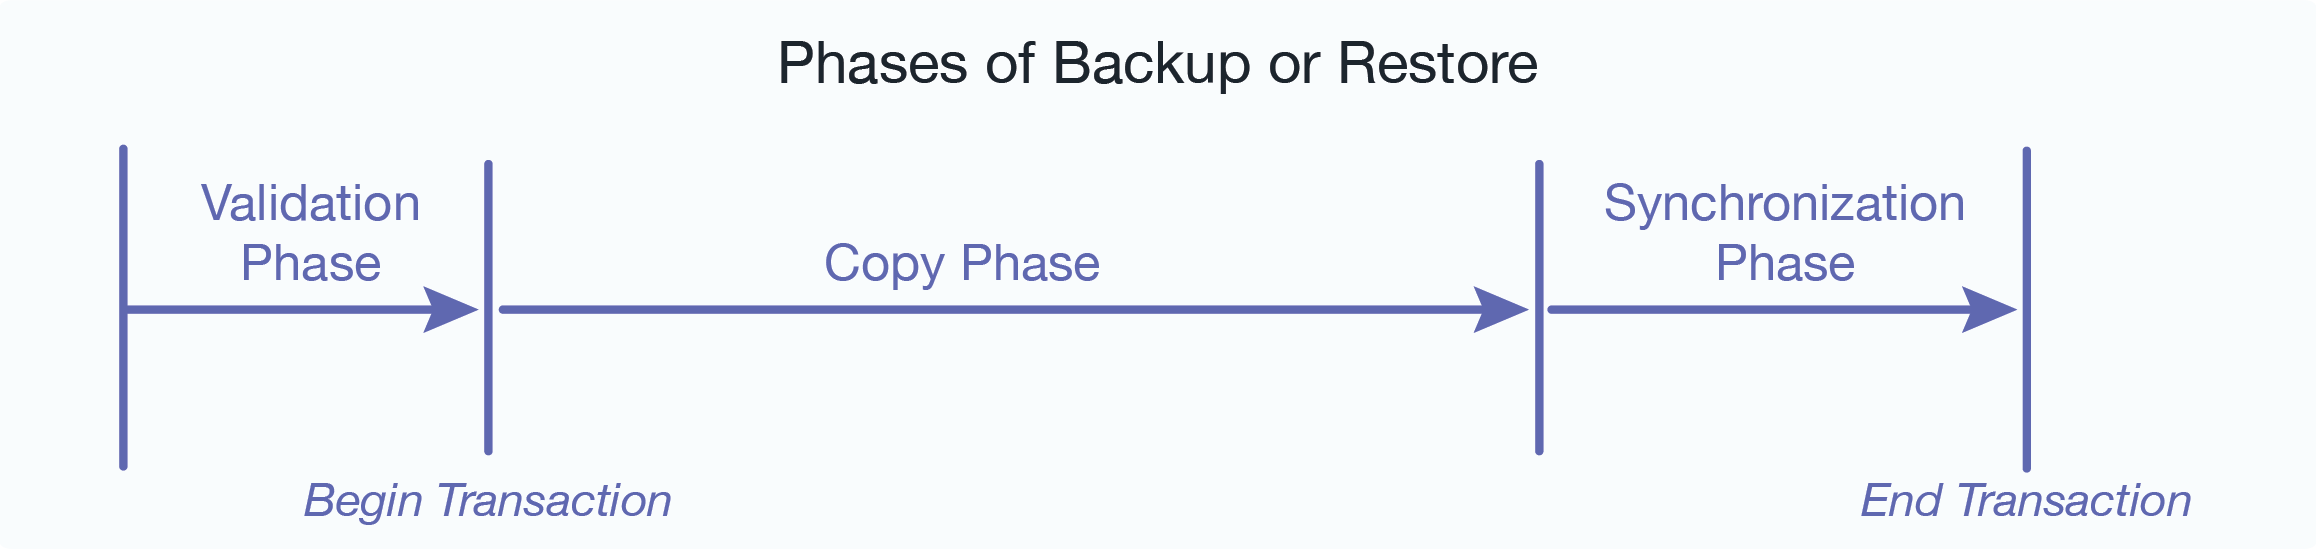 Figure showing the phases of a backup or restore operation.